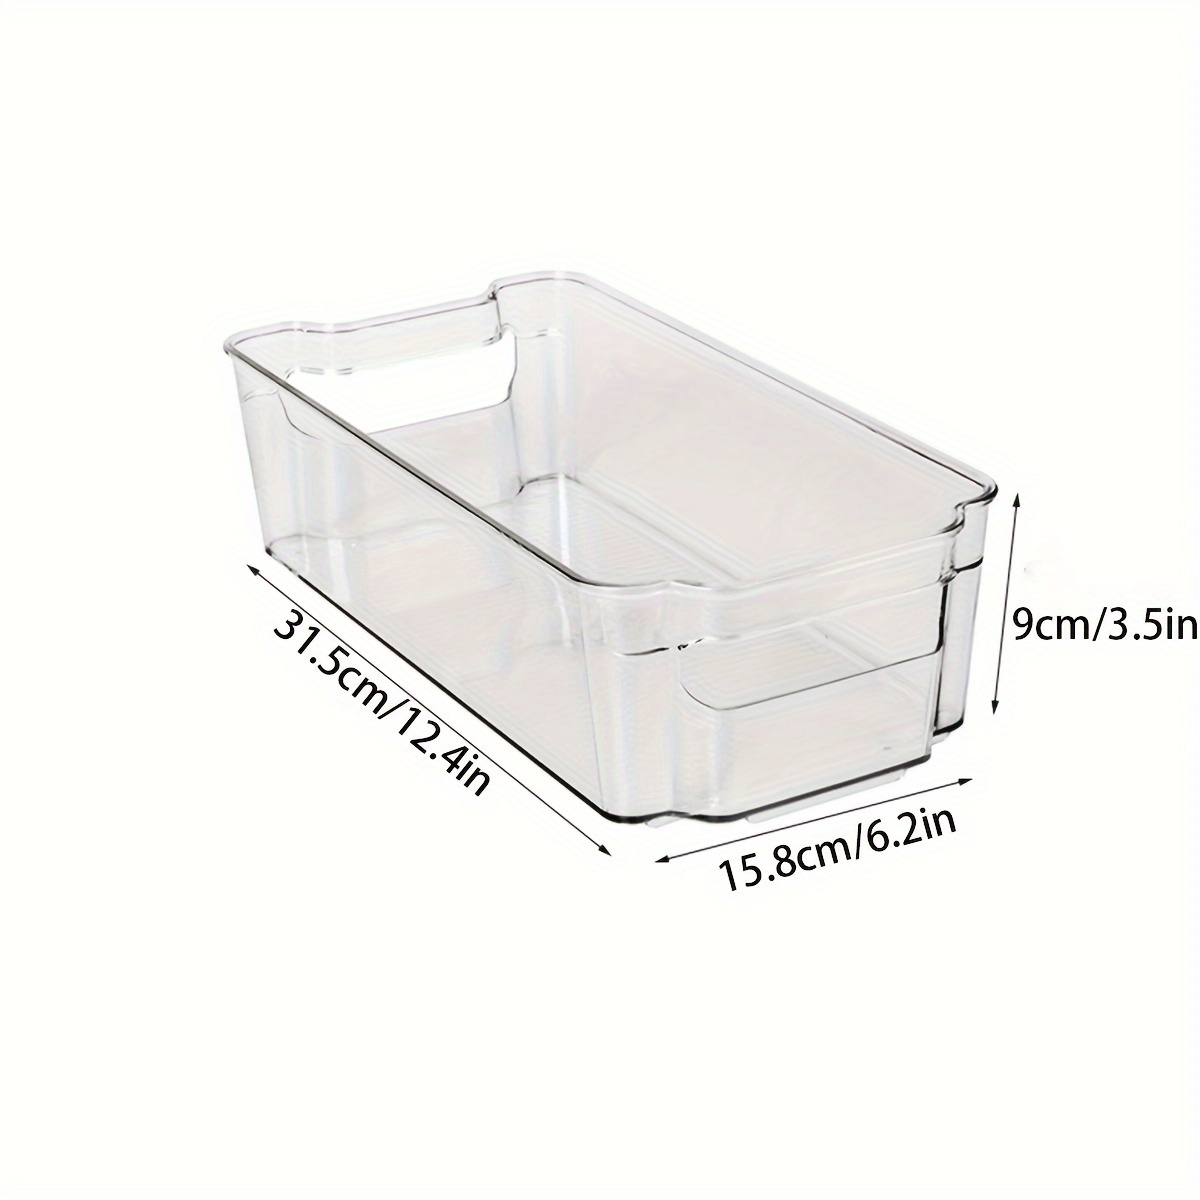  Set Of 8 Refrigerator Pantry Organizer Bins - 4 Big And 4 Small  Clear Food Storage Baskets for Kitchen, Countertops, Cabinets, Freezer,  Bedrooms, Bathrooms - Plastic Household Storage Containers : Home & Kitchen